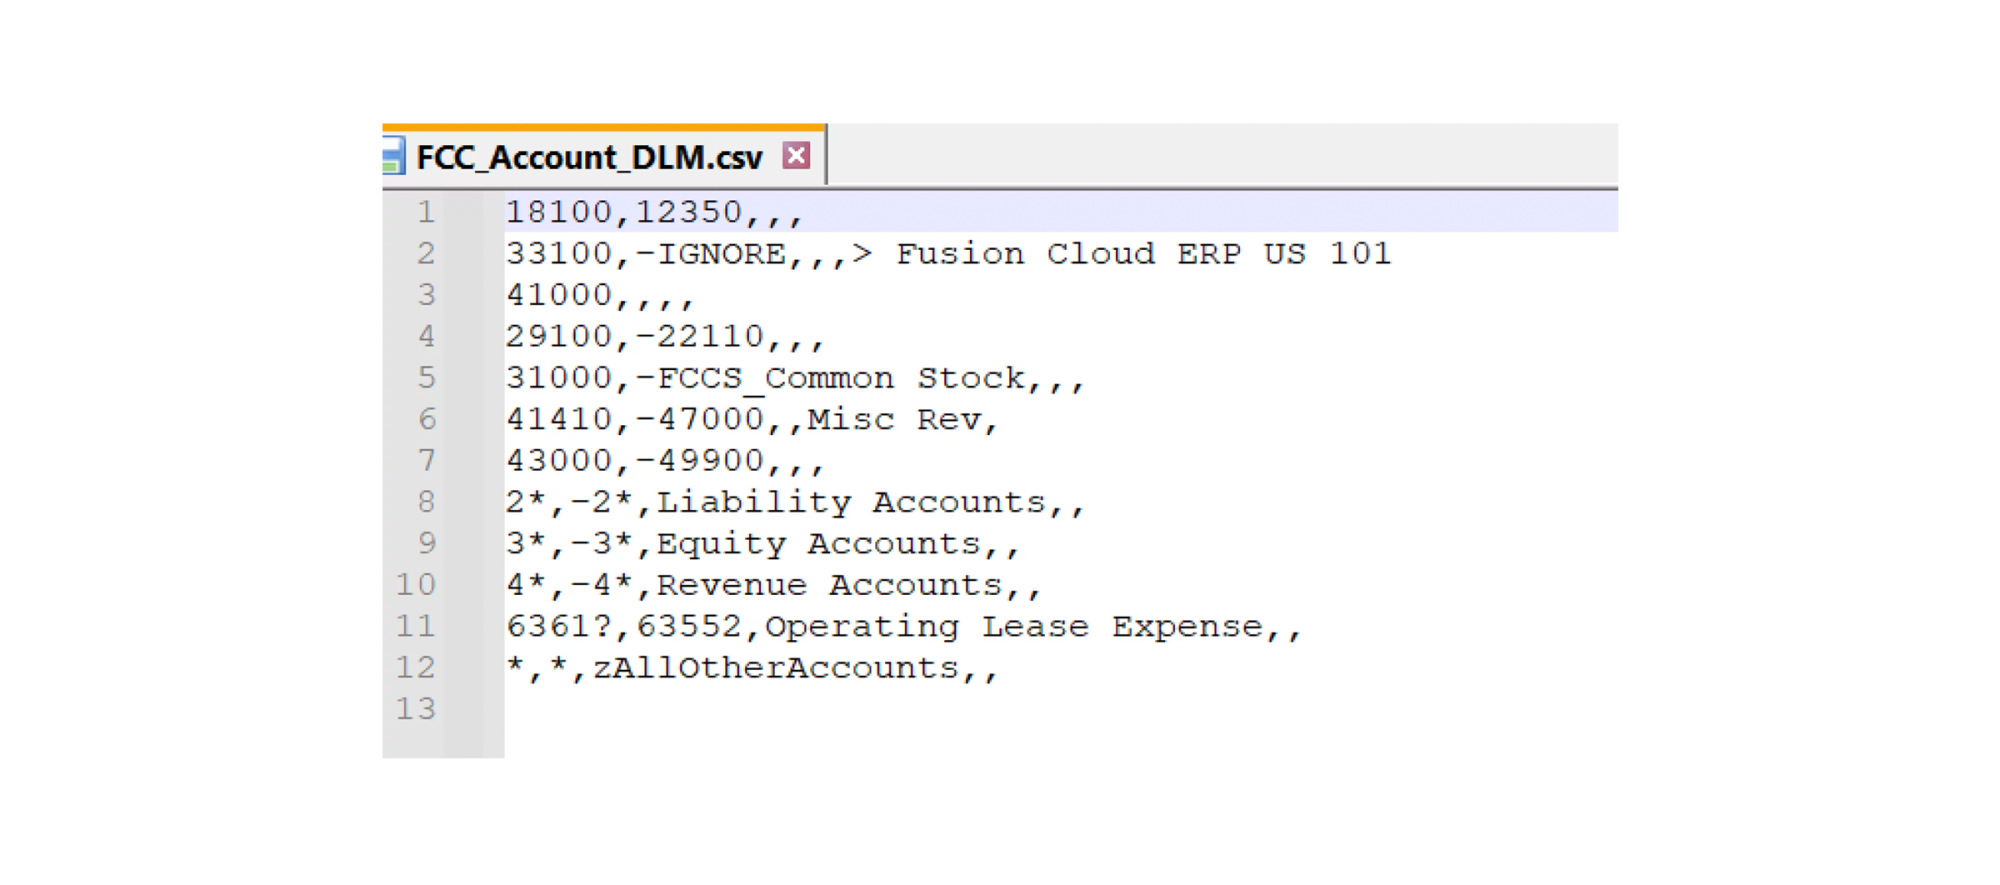 Oracle EDM mapping output file